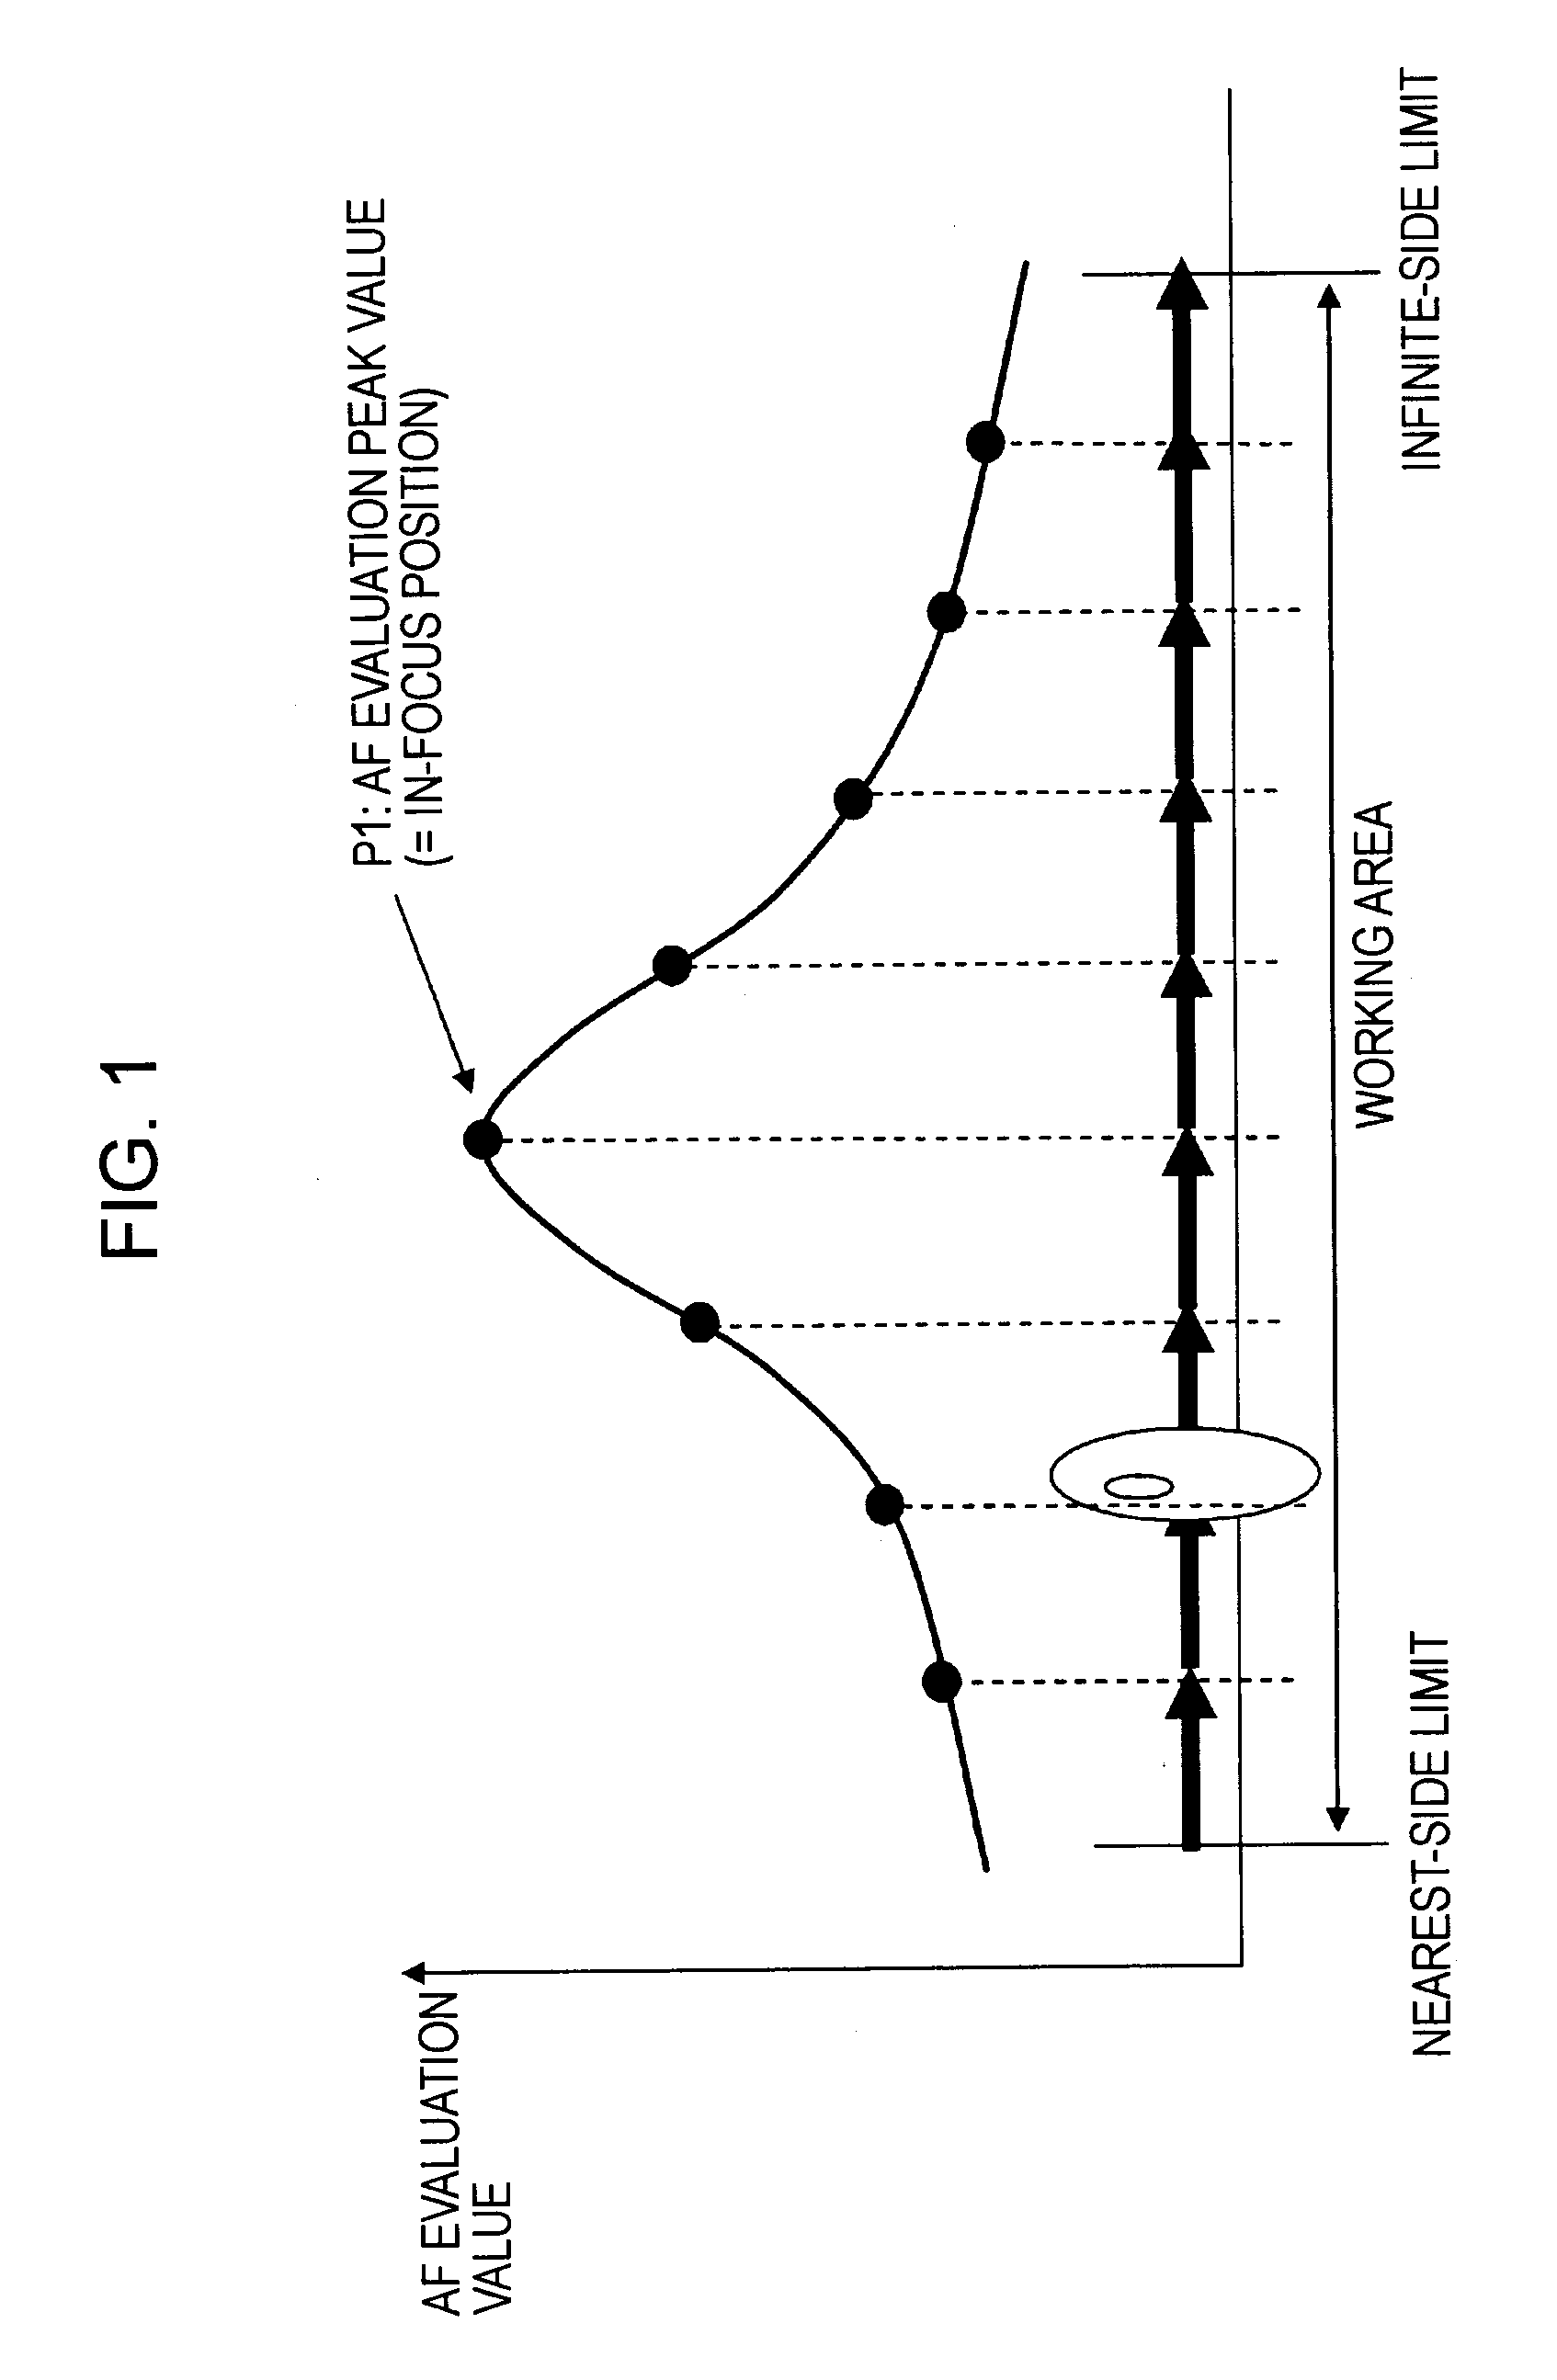 Image pickup apparatus, control method therefor, and computer program